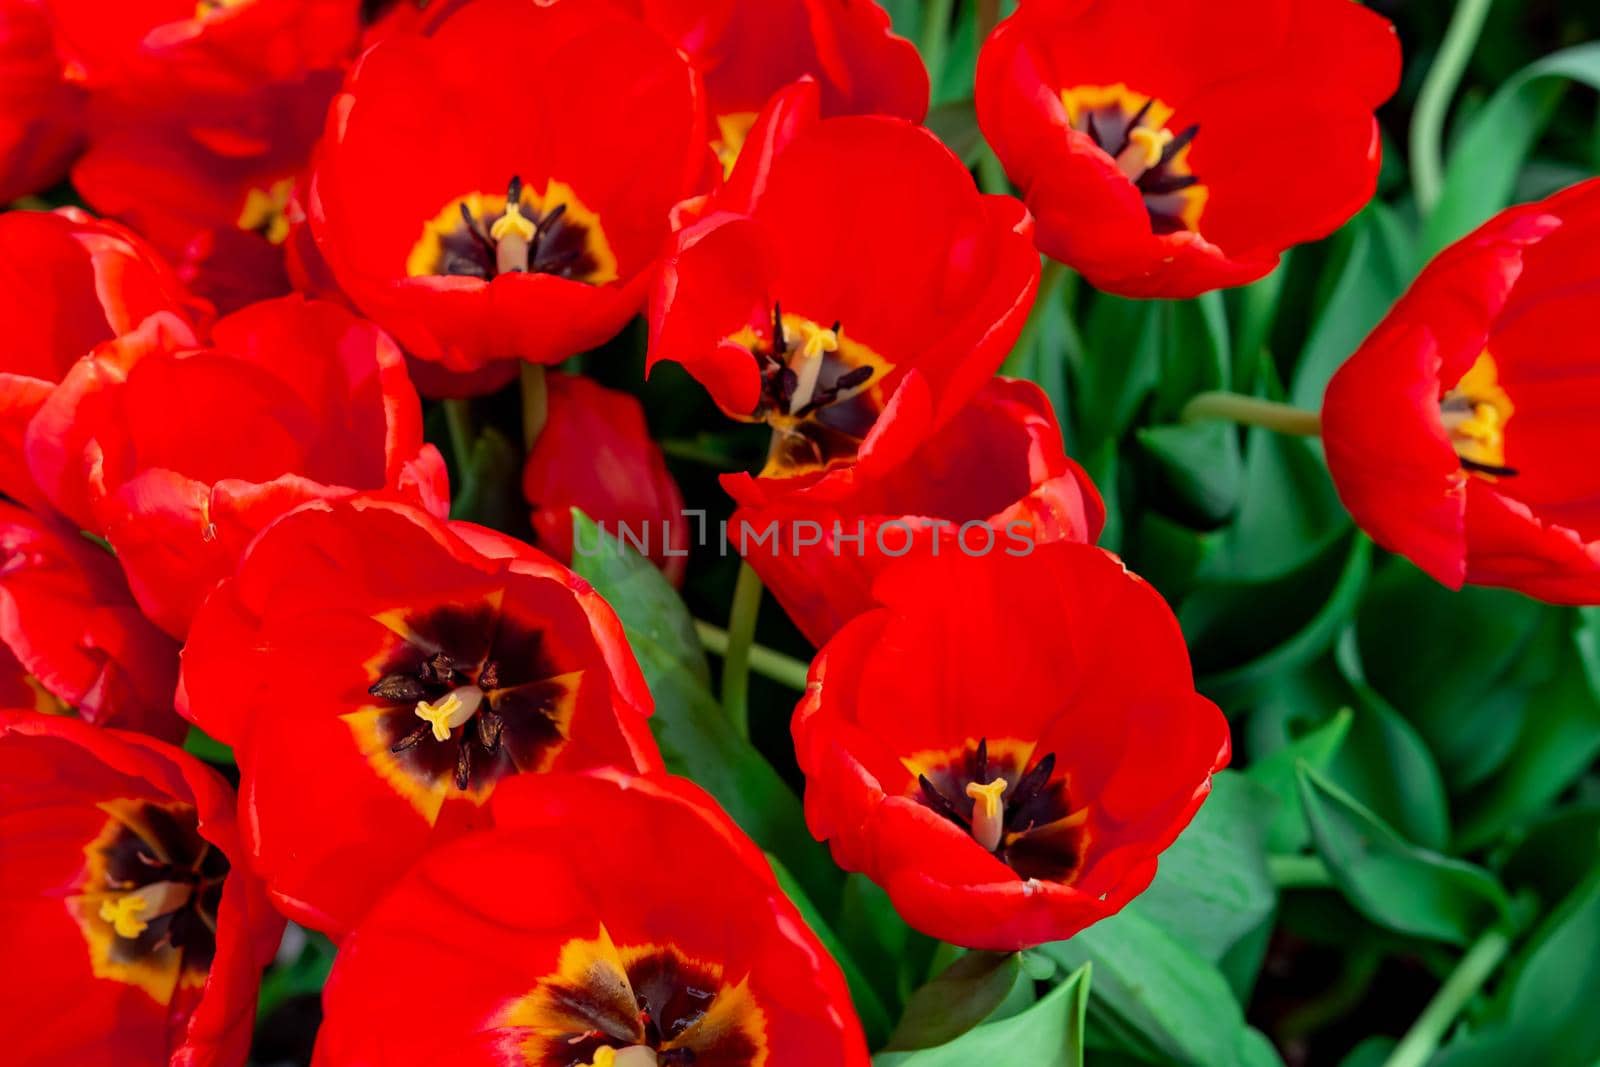 Colorful Red flowers macro shot with blurry green background by billroque